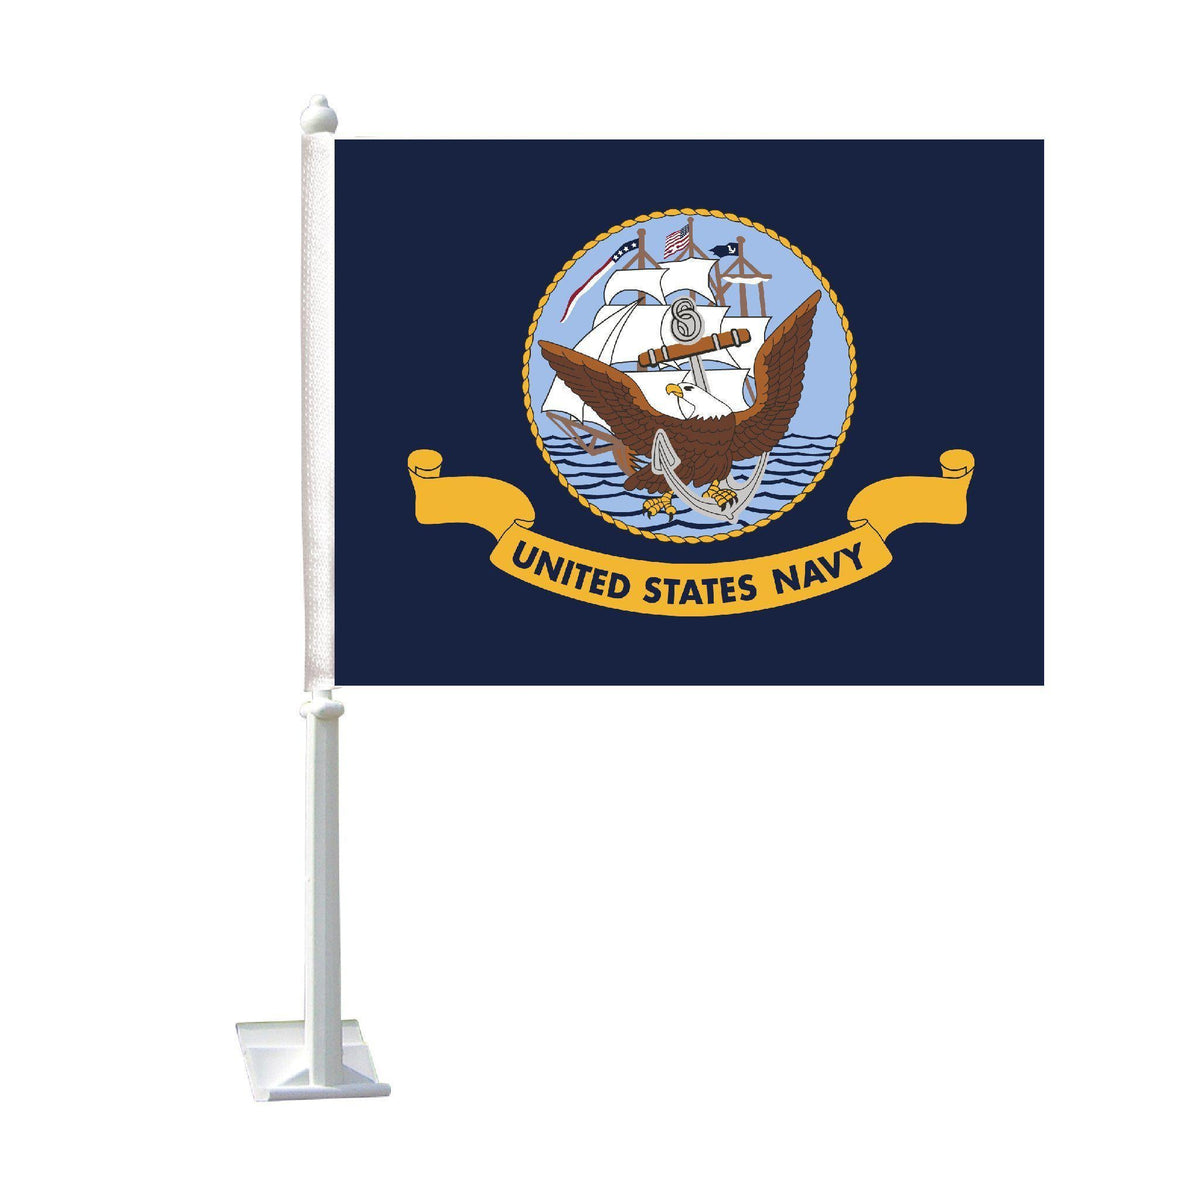 U.S. Navy Car Flag is two-sided and durable 